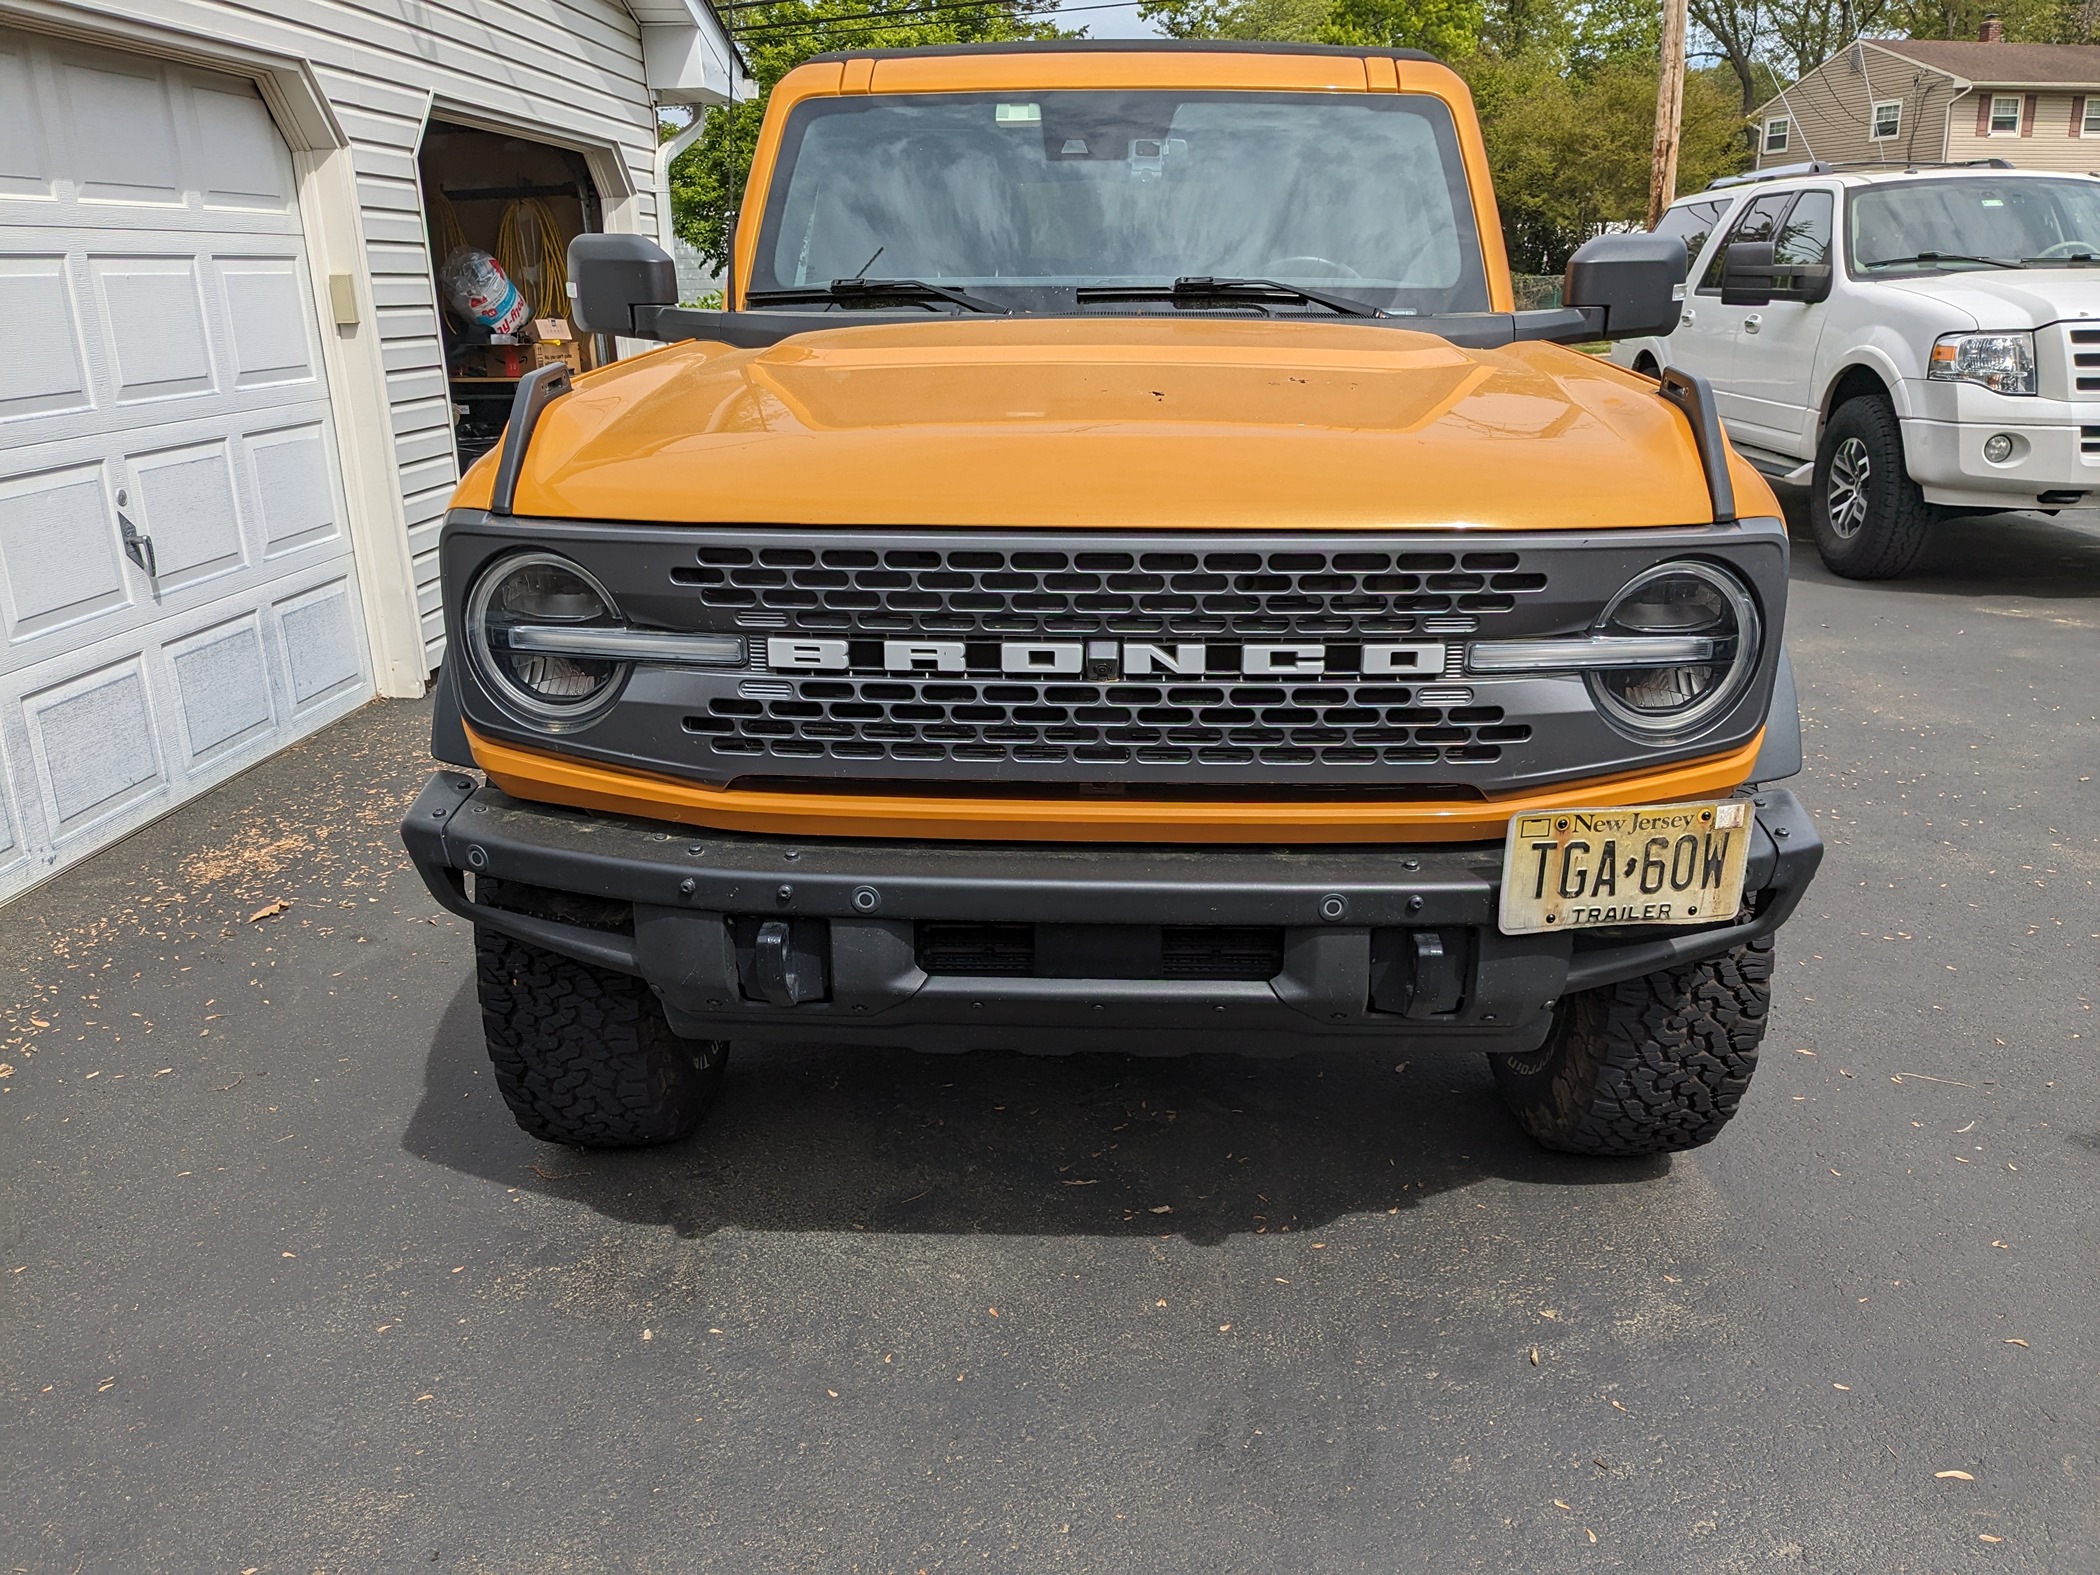 Ford Bronco Missing Accessories / Parts in Bronco Aftermarket? PXL_20240514_142530984.MP